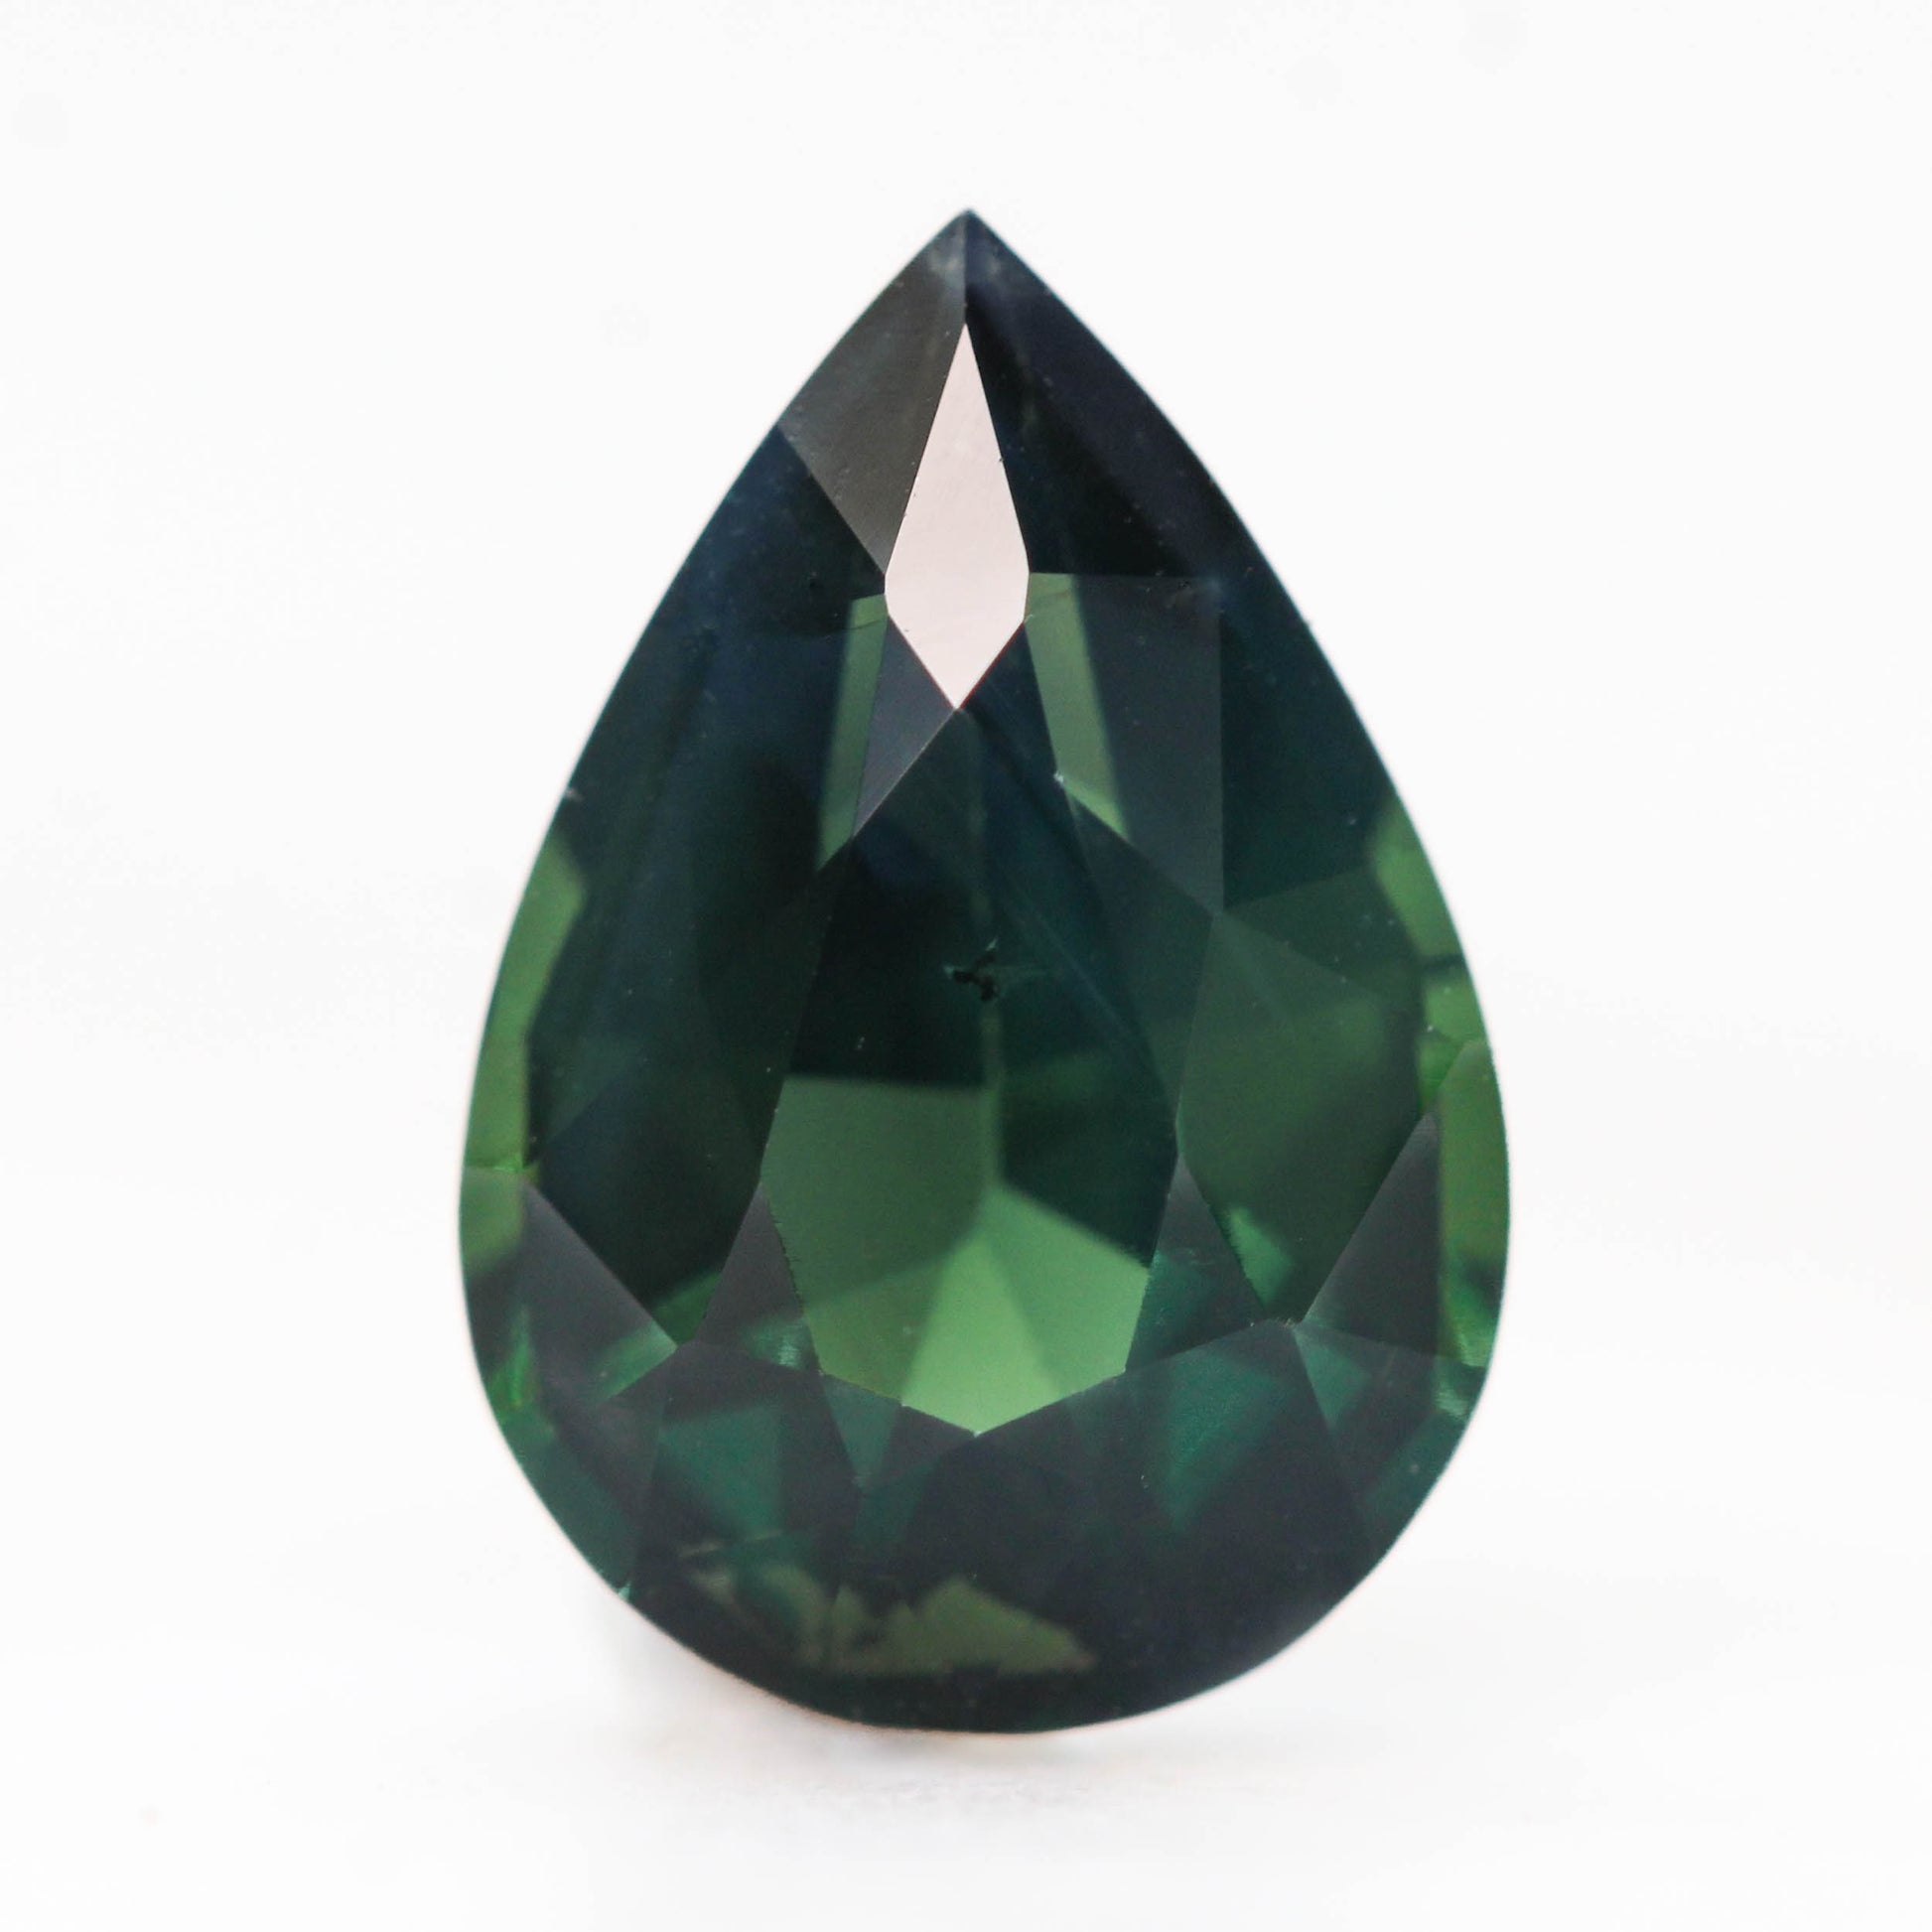 2.85 Carat Certified Dark Green Pear Sapphire for Custom Work - Inventory Code GPS285 - Midwinter Co. Alternative Bridal Rings and Modern Fine Jewelry